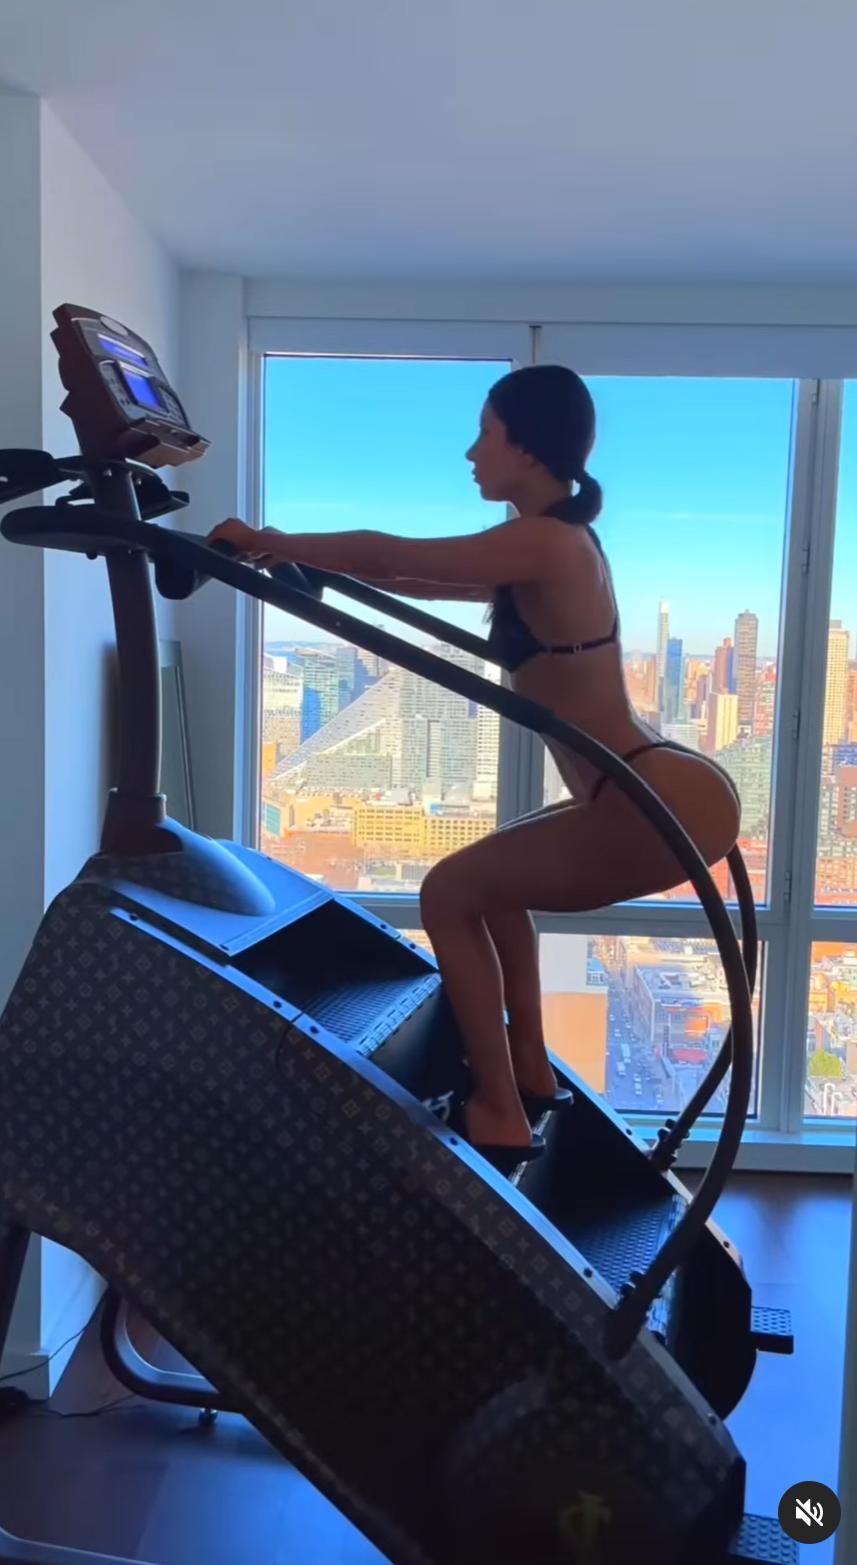 Jen Selter practices her transitions on her stair climber